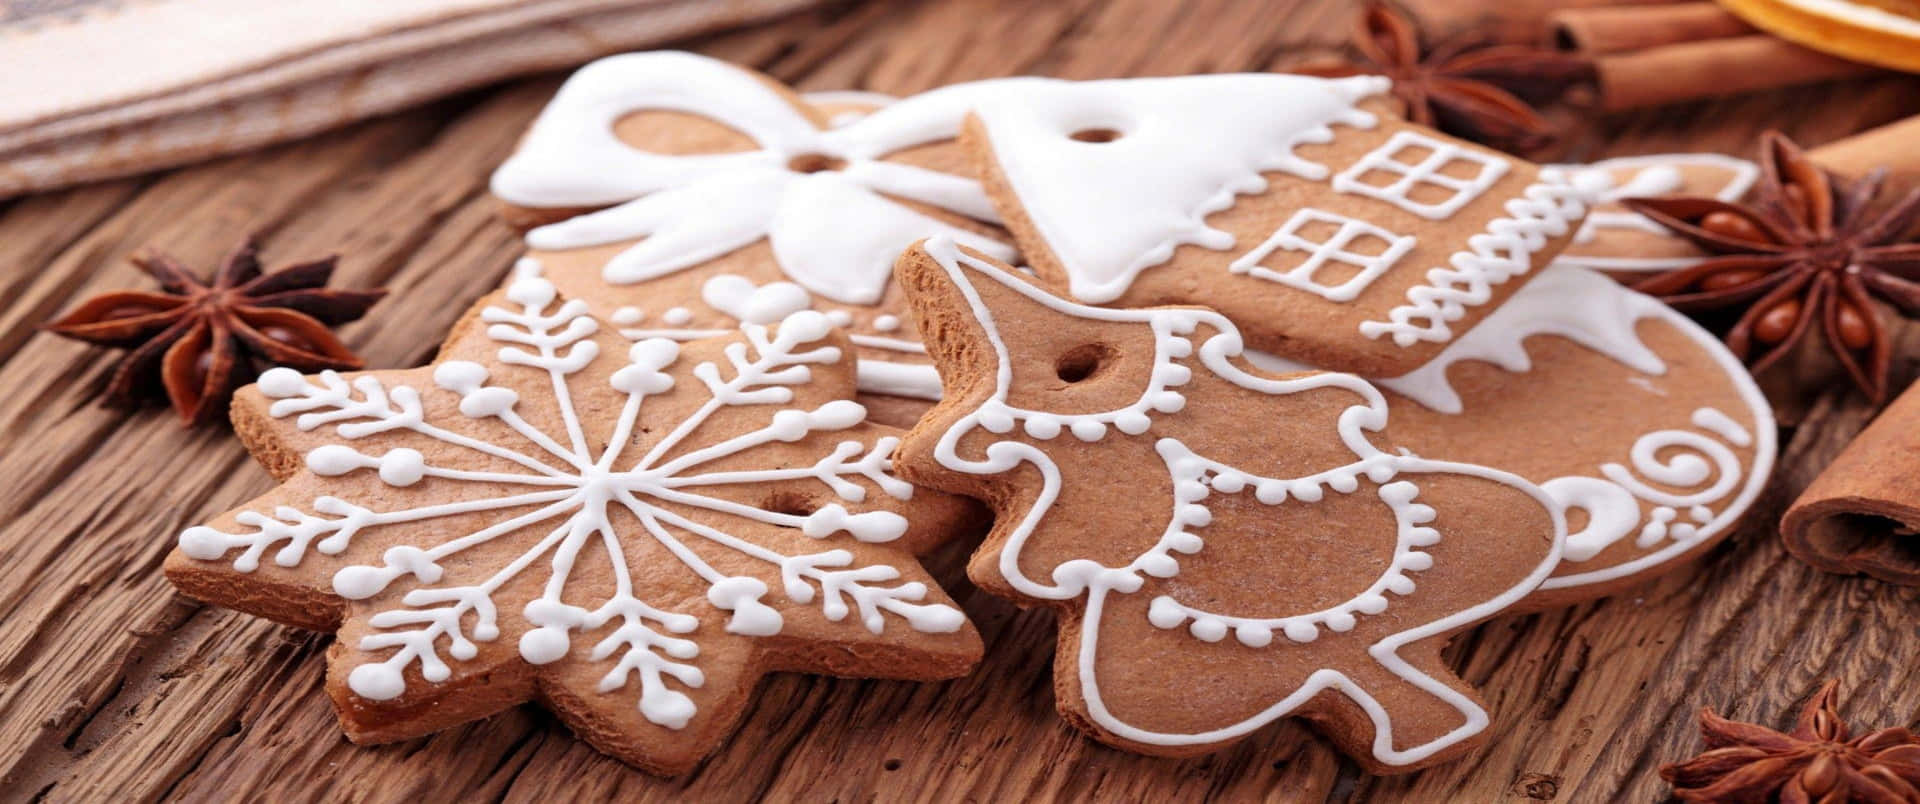 Sweet Christmas Themed 3440x1440p Cookies Background